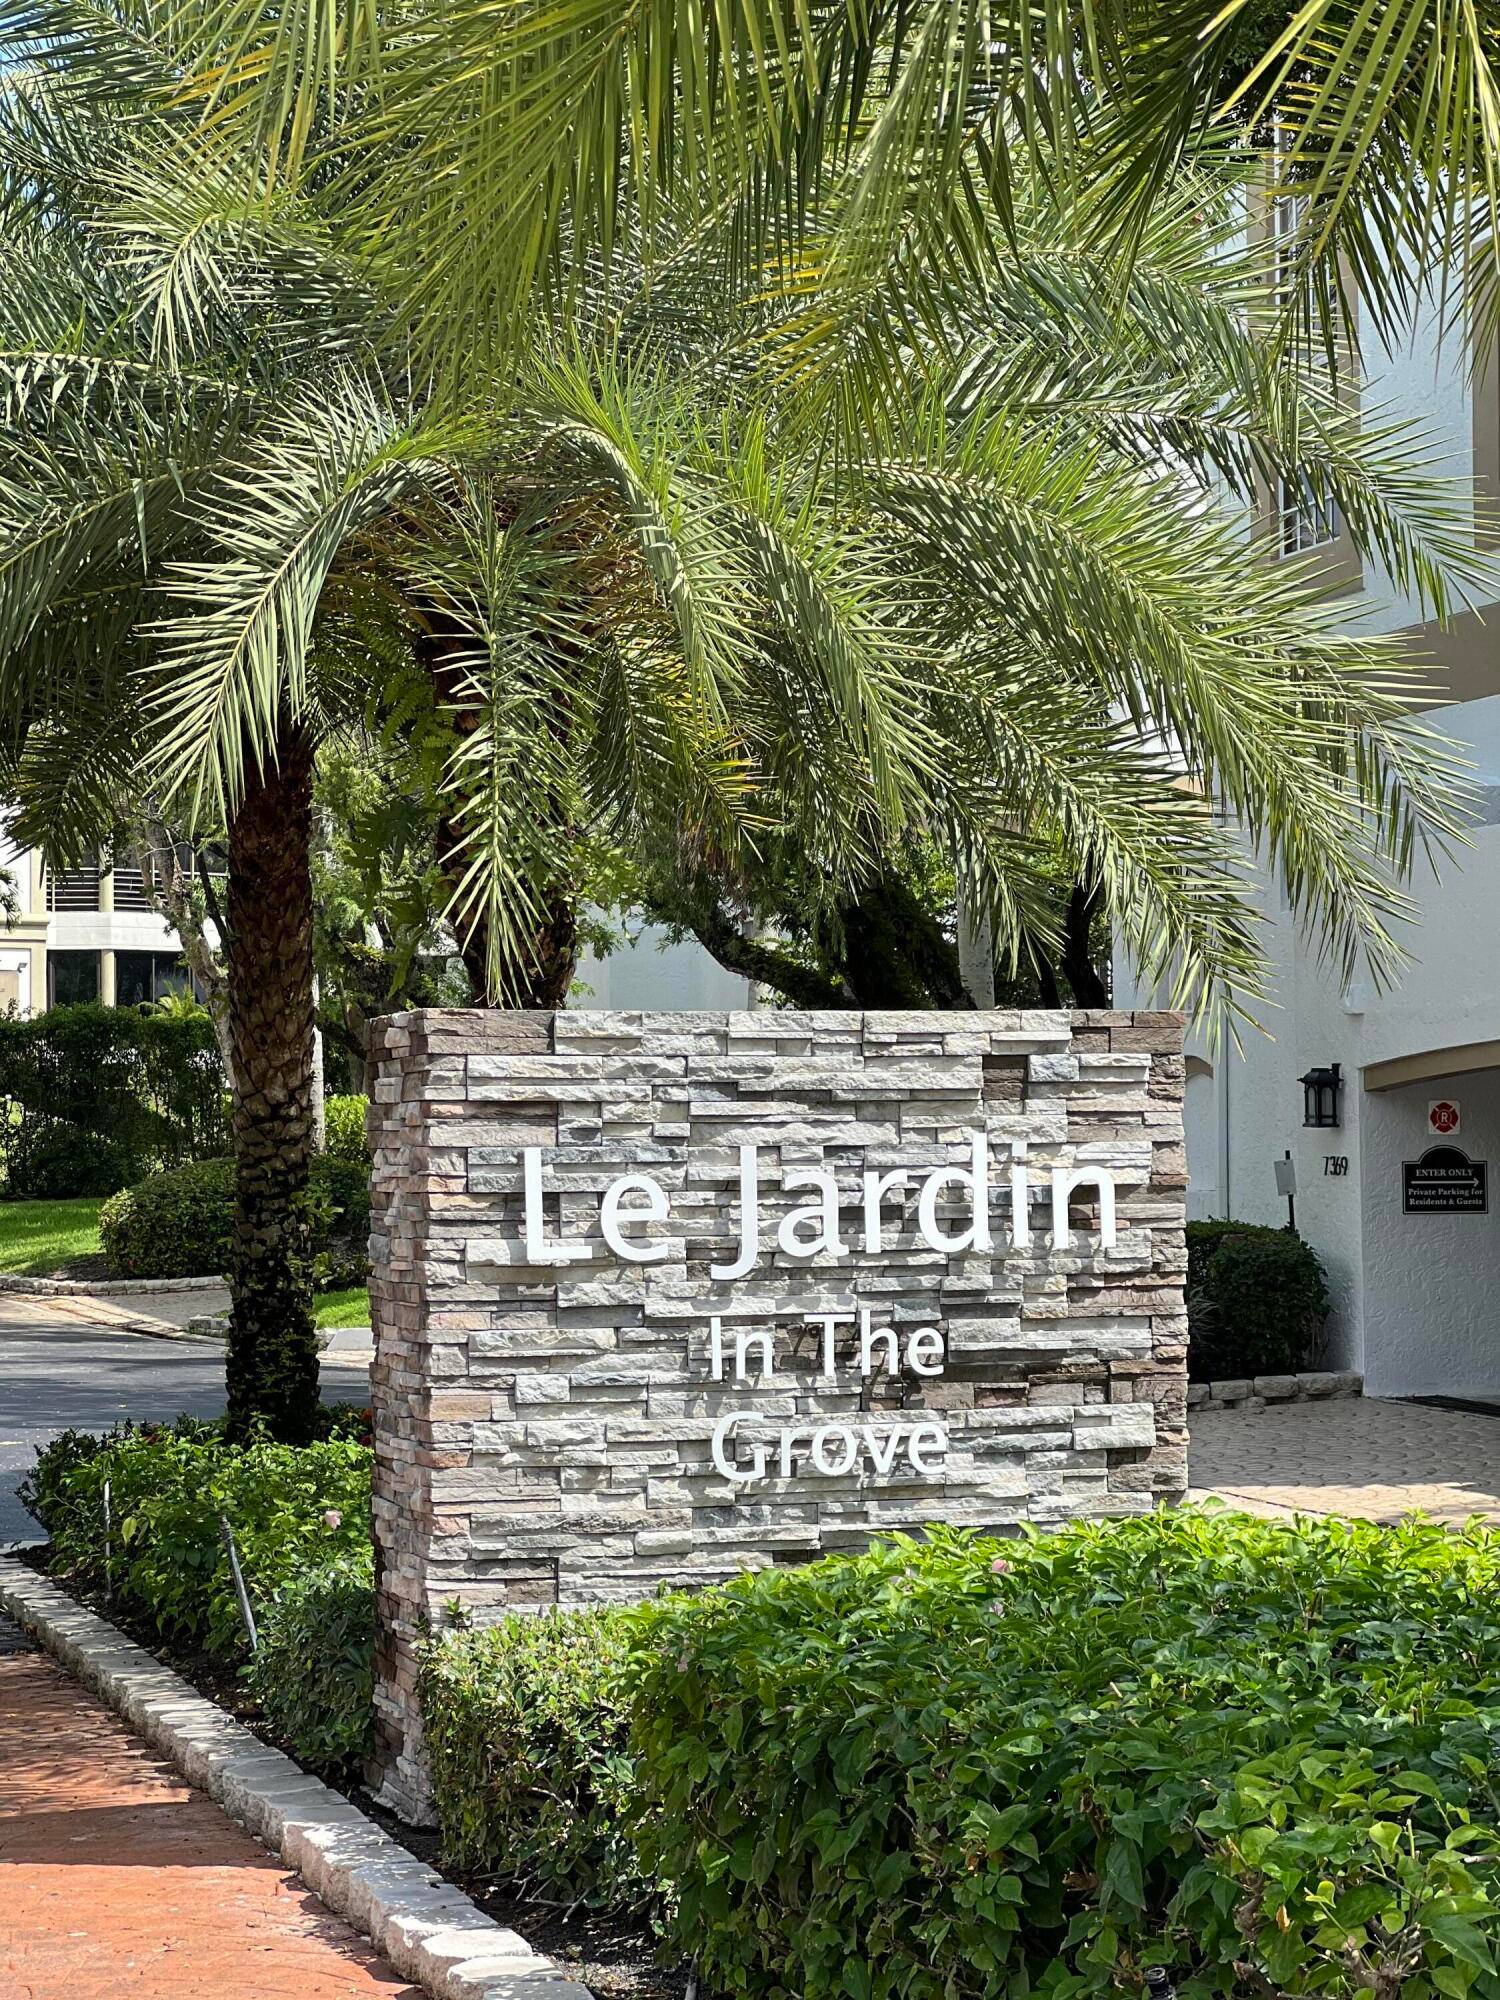 Golf and tennis membership included, one golf cart space, golf cart additional feeParking space directly in front of elevatorCan see all from windows with smashing view Walk to houses of ...